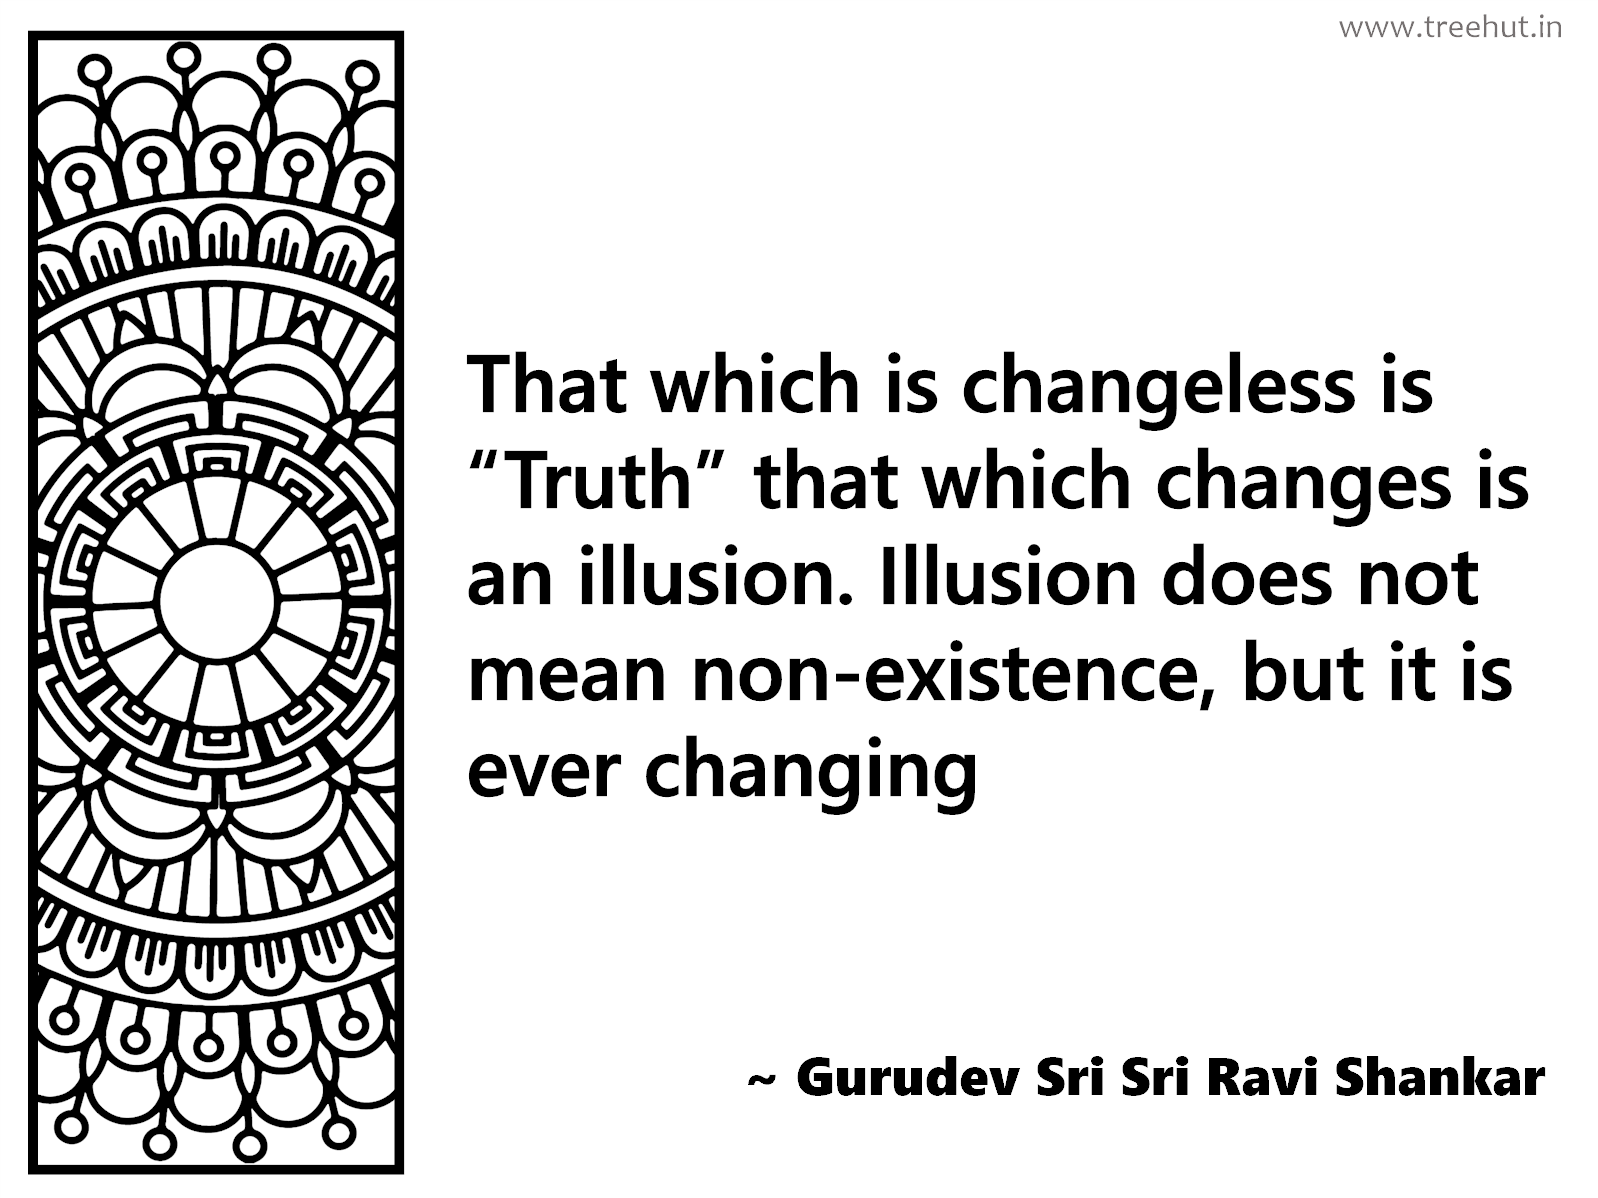 That which is changeless is “Truth” that which changes is an illusion. Illusion does not mean non-existence, but it is ever changing Inspirational Quote by Gurudev Sri Sri Ravi Shankar, coloring pages